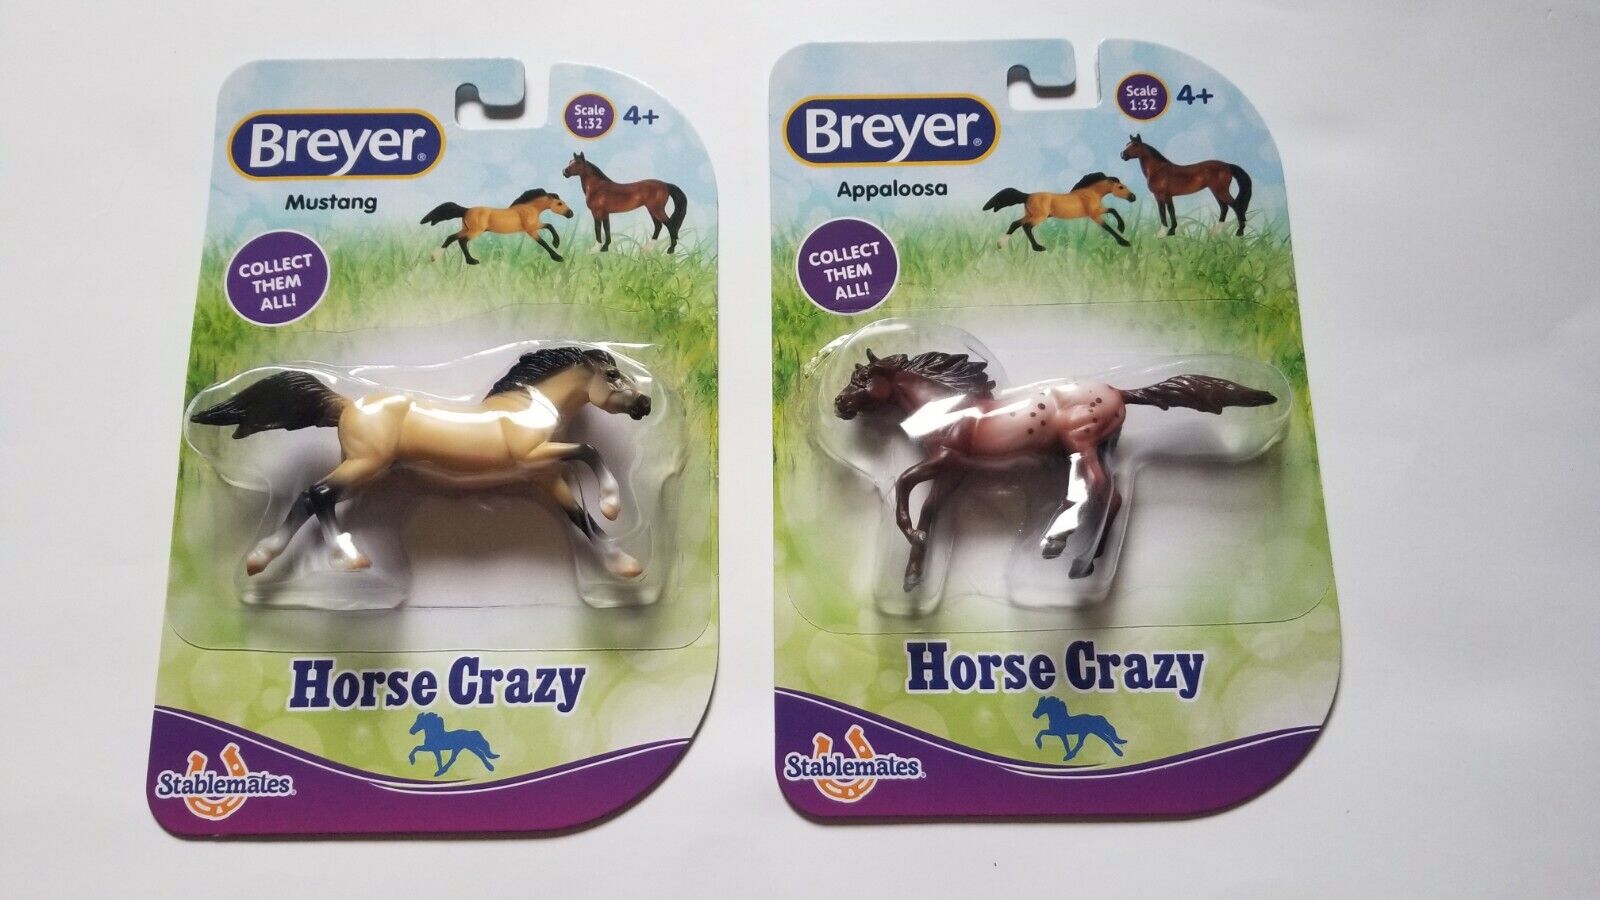 NEW Breyer Horse Crazy Collection Mustang & Appaloosa Stablemates 1:32 Scale NIP Breyer